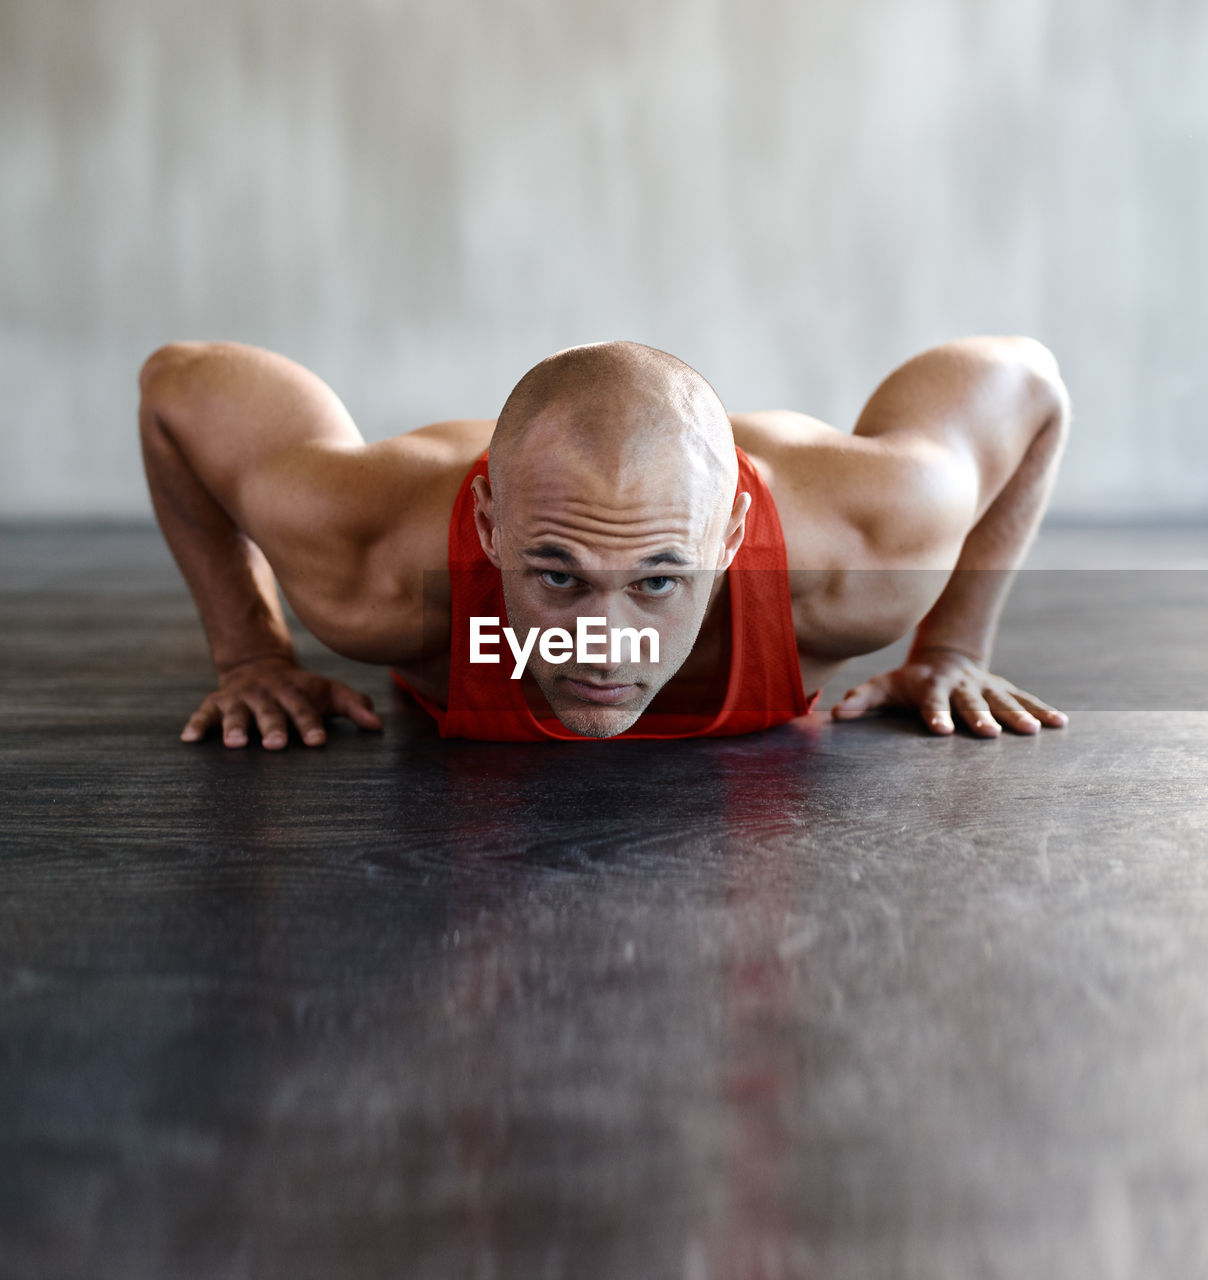 Portrait of man exercising at gym